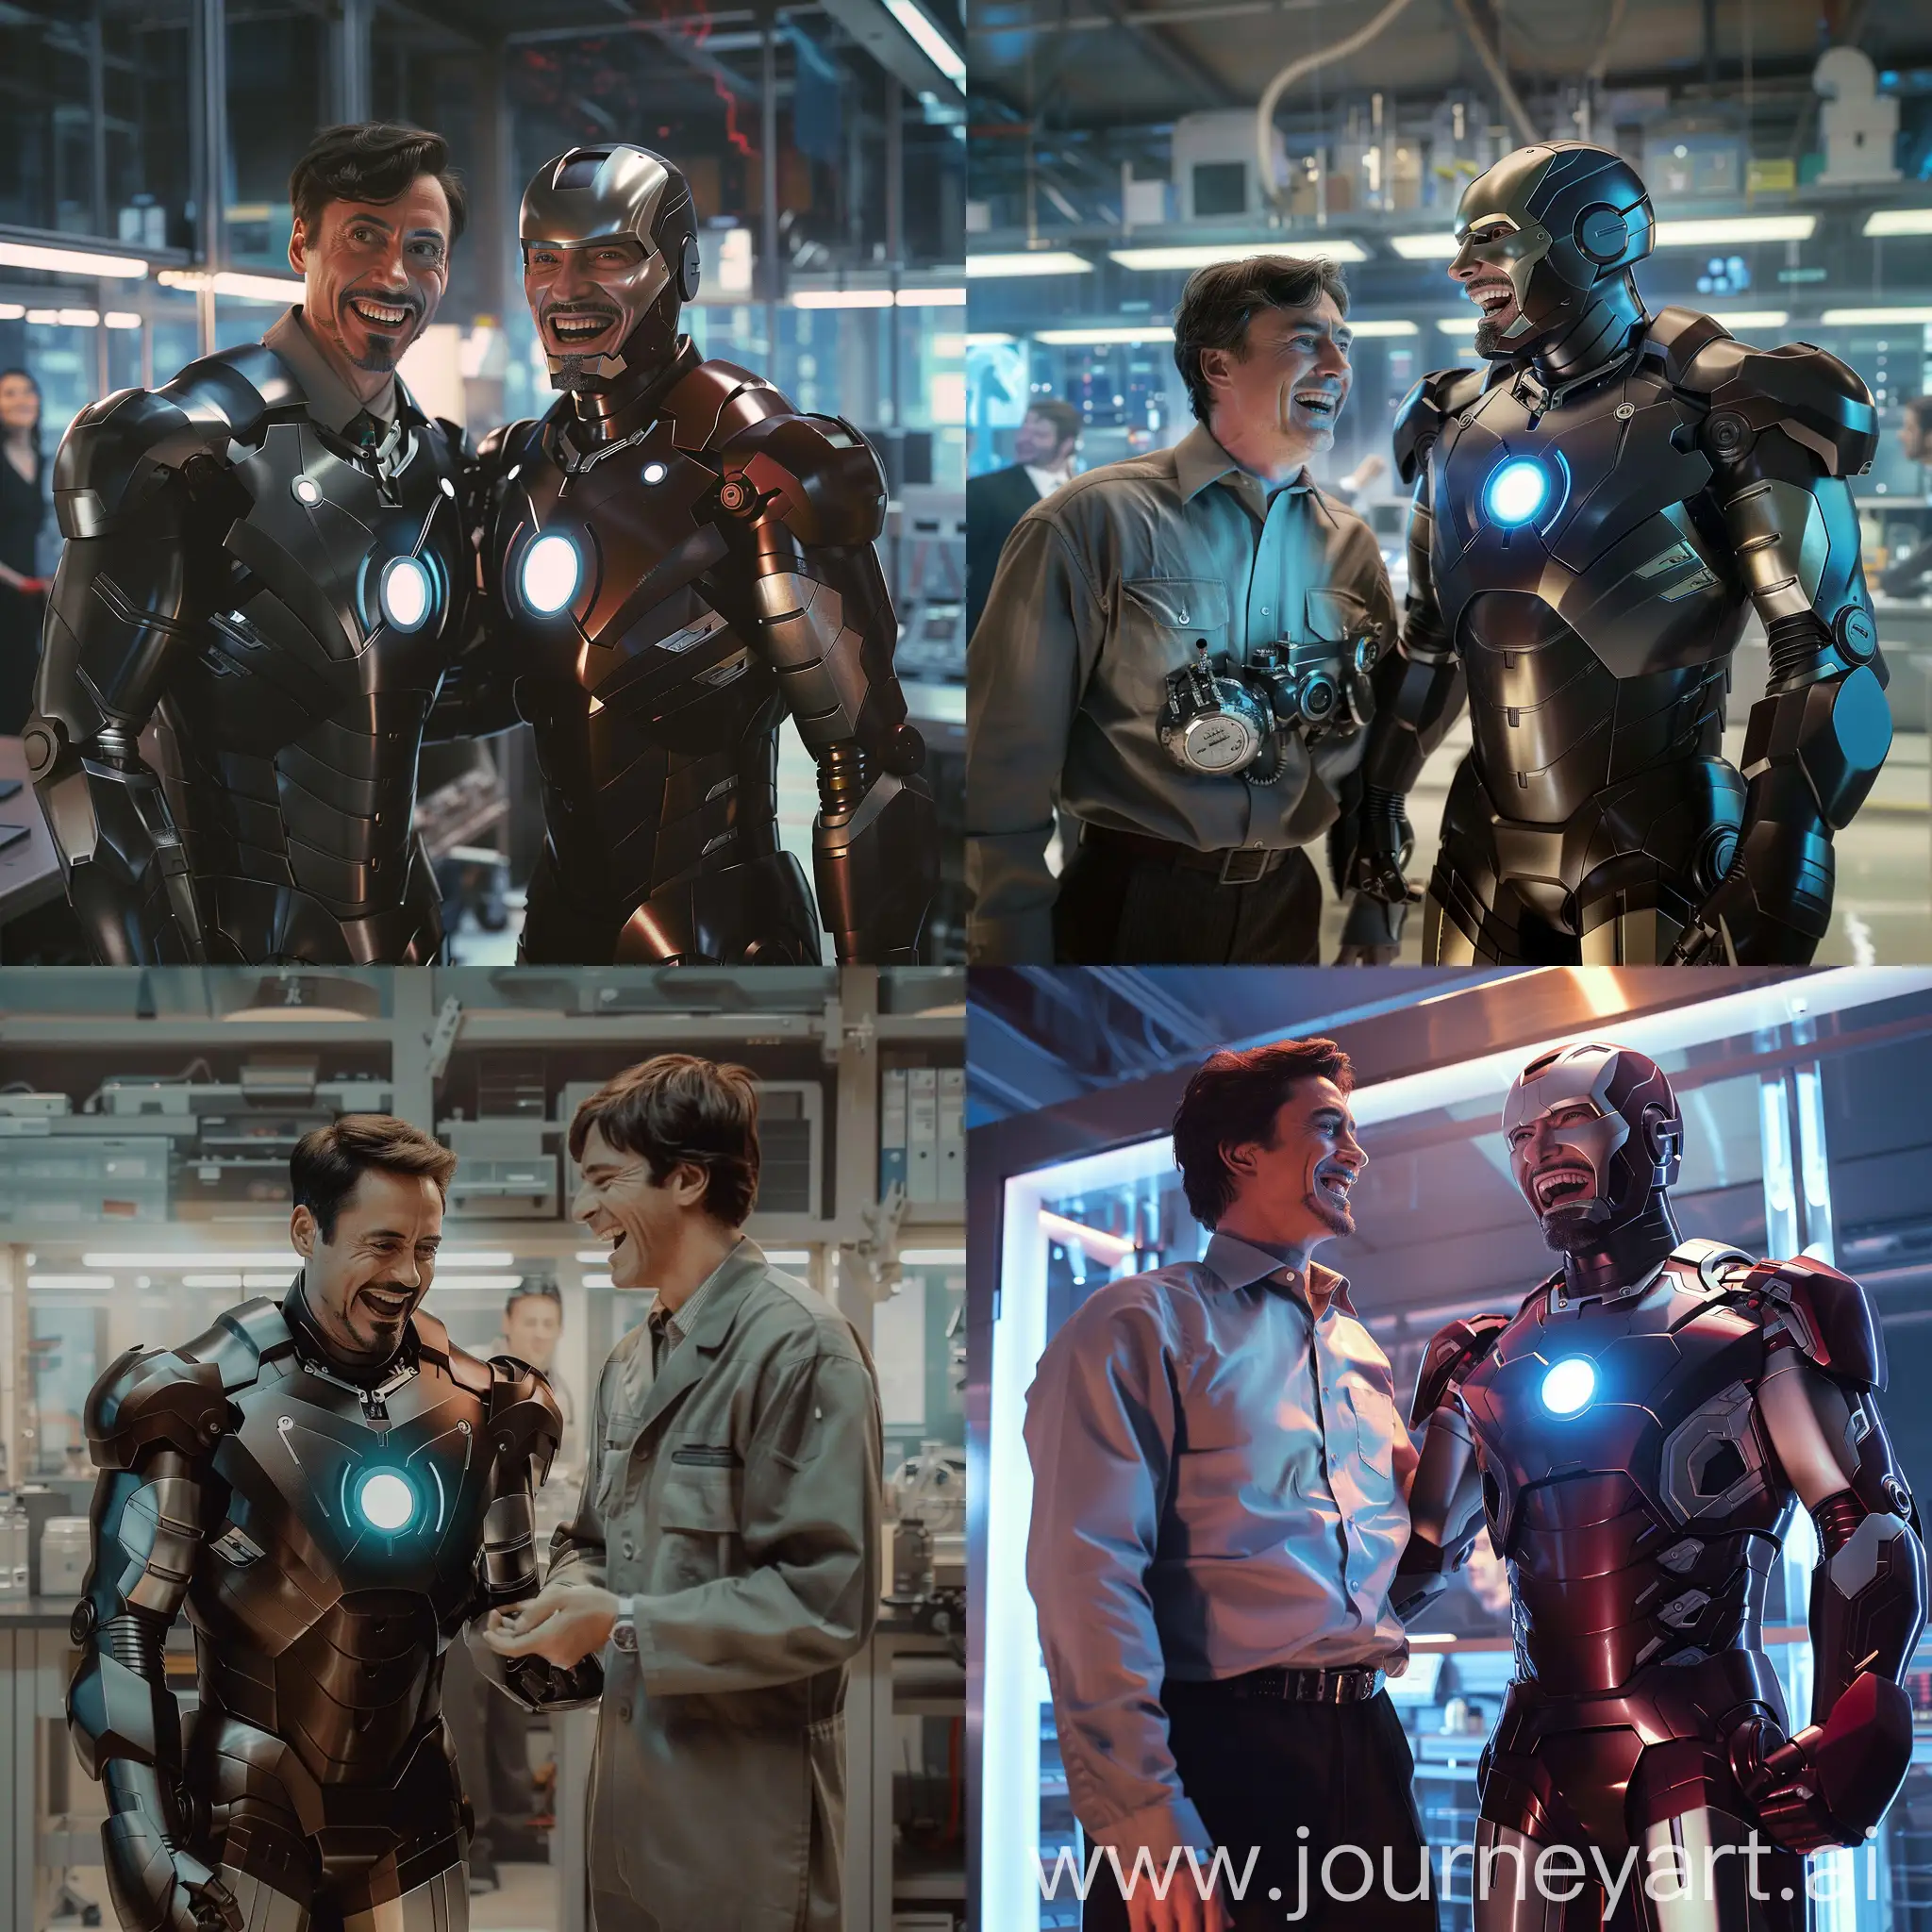 !mj1 Tony Stark in Iron Man suit standing beside Cillian Murphy as J. Robert Oppenheimer, friends dynamic pose, sharing a laugh, high-tech lab background, cinematic, for iPhone wallpaper, cool tones, metallic gloss on armor, dramatic backlighting, detailed facial expressions, engaging --ar 9:16 --s 300 --v 6 --chaos 15